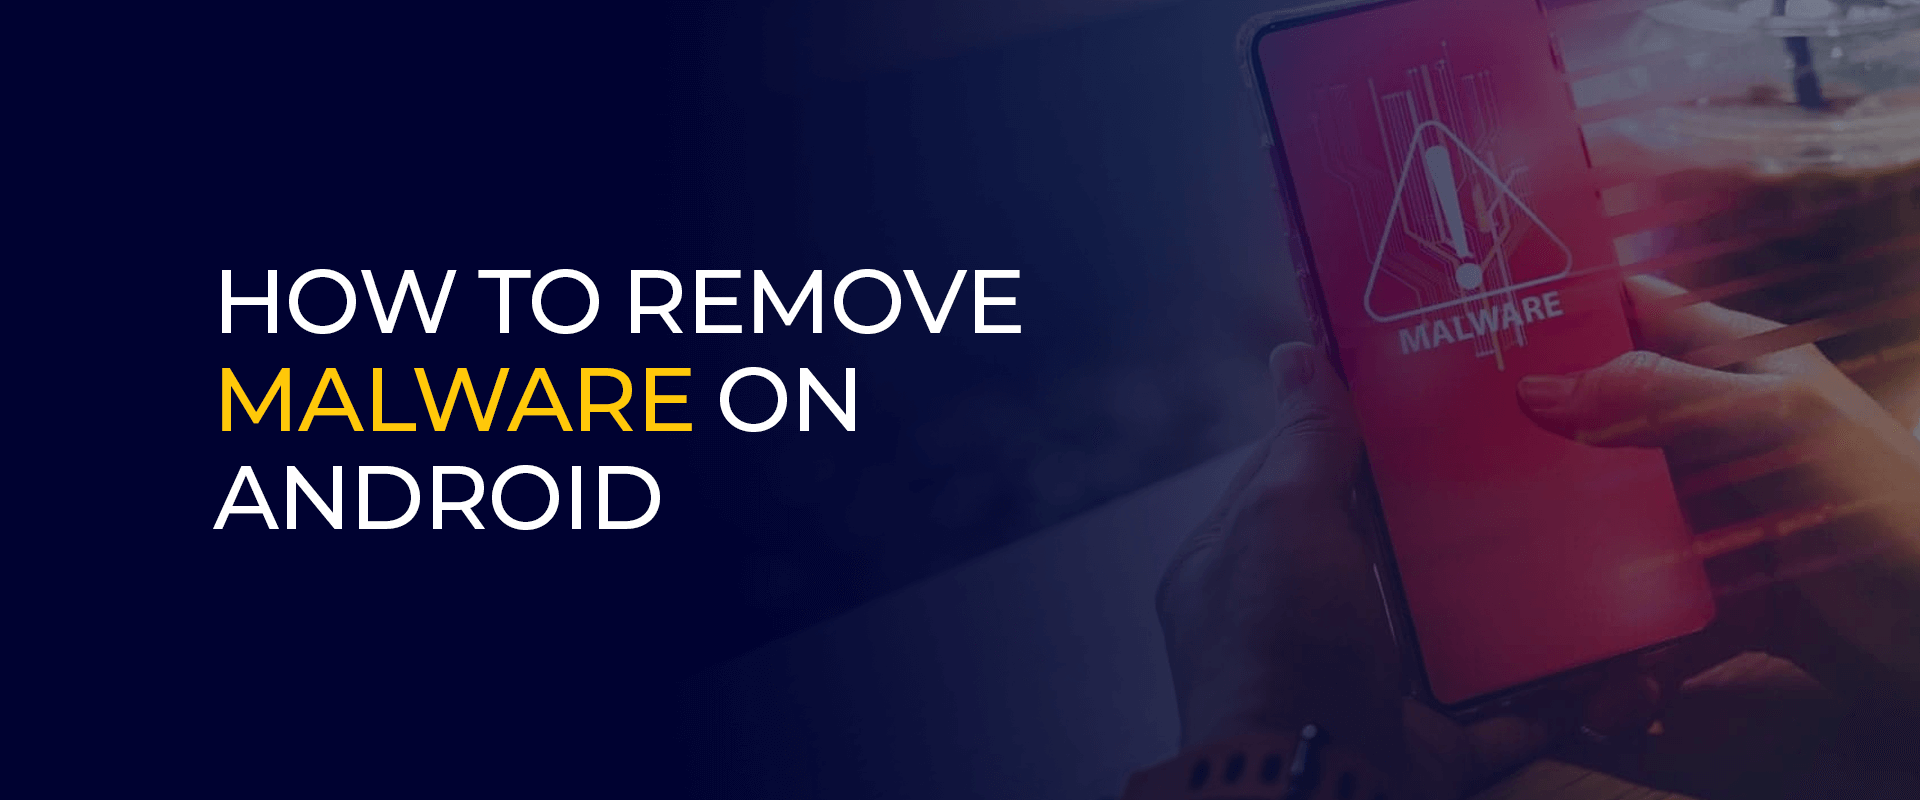 How to remove malware on android